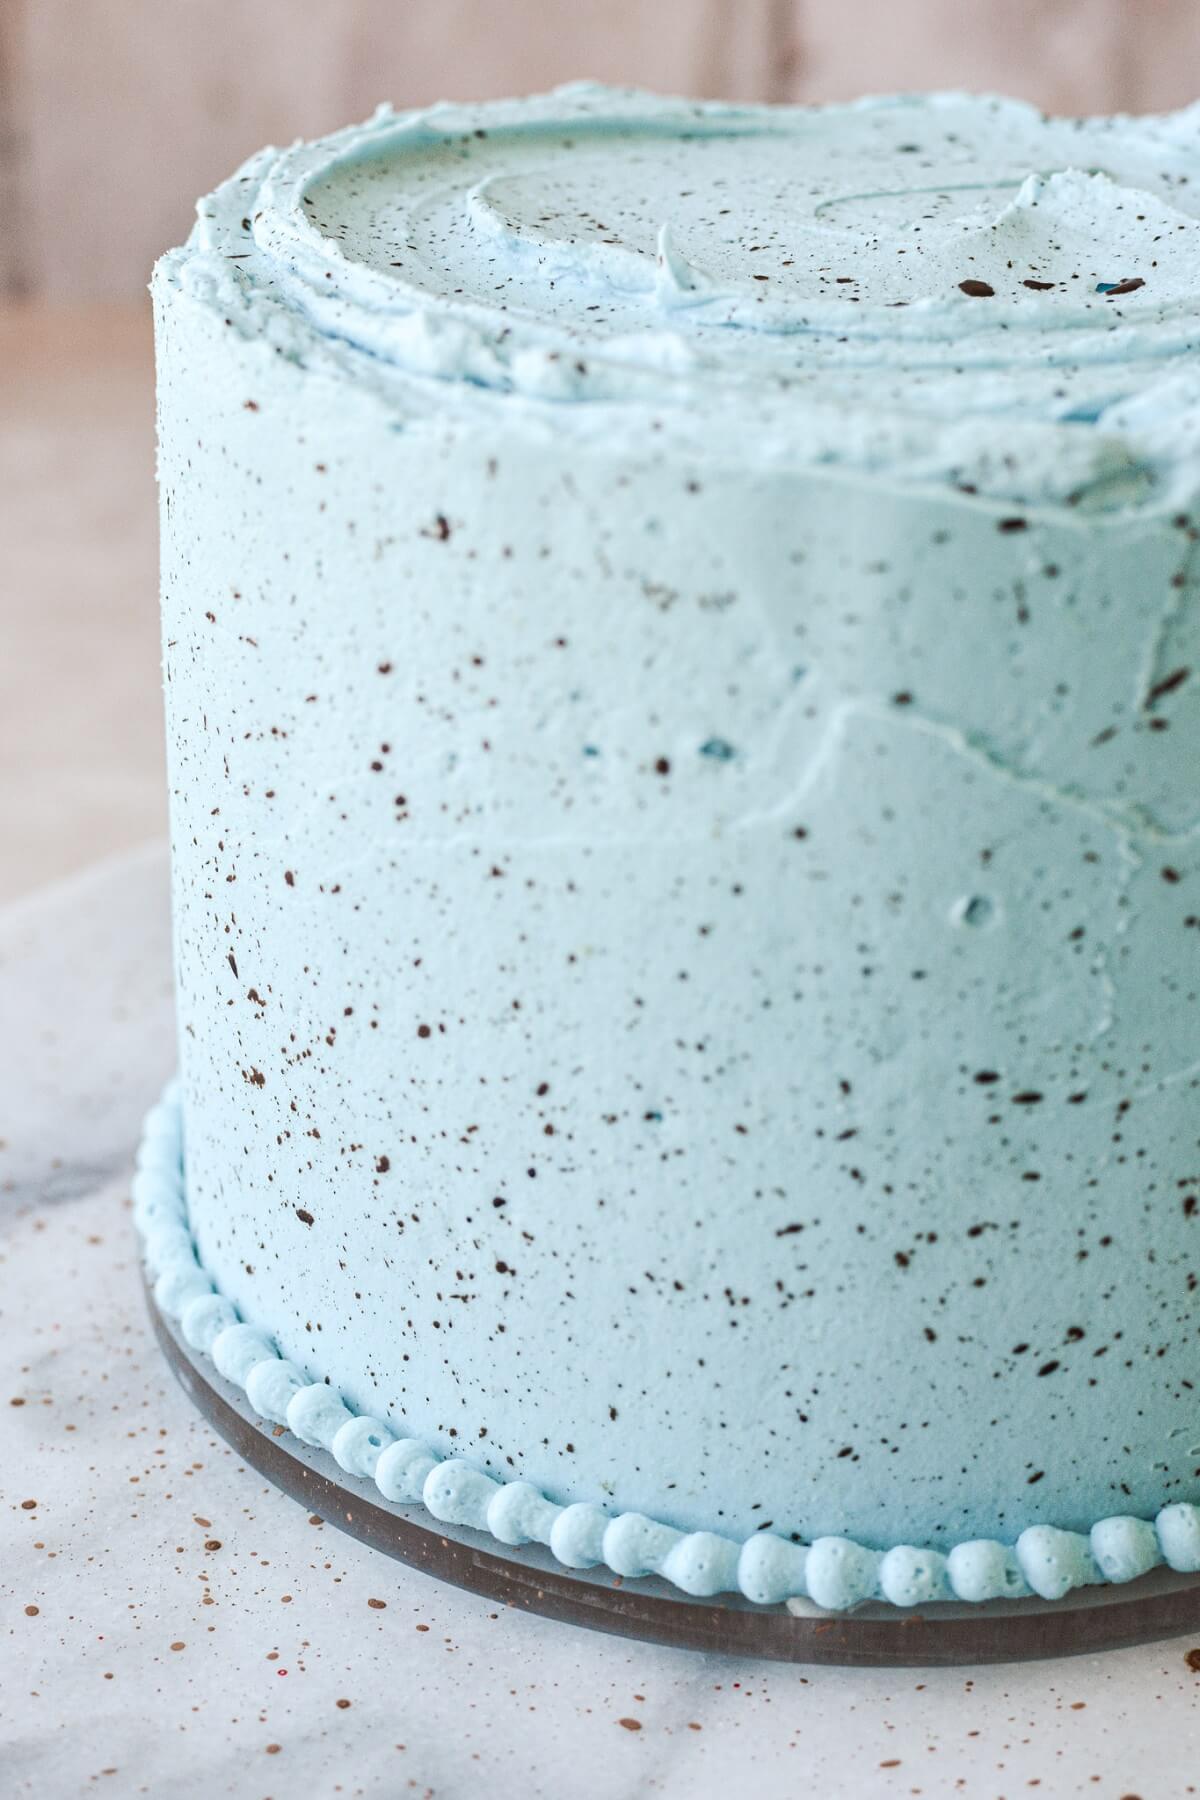 Blue frosted cake spattered with brown specks to look like an eggshell.